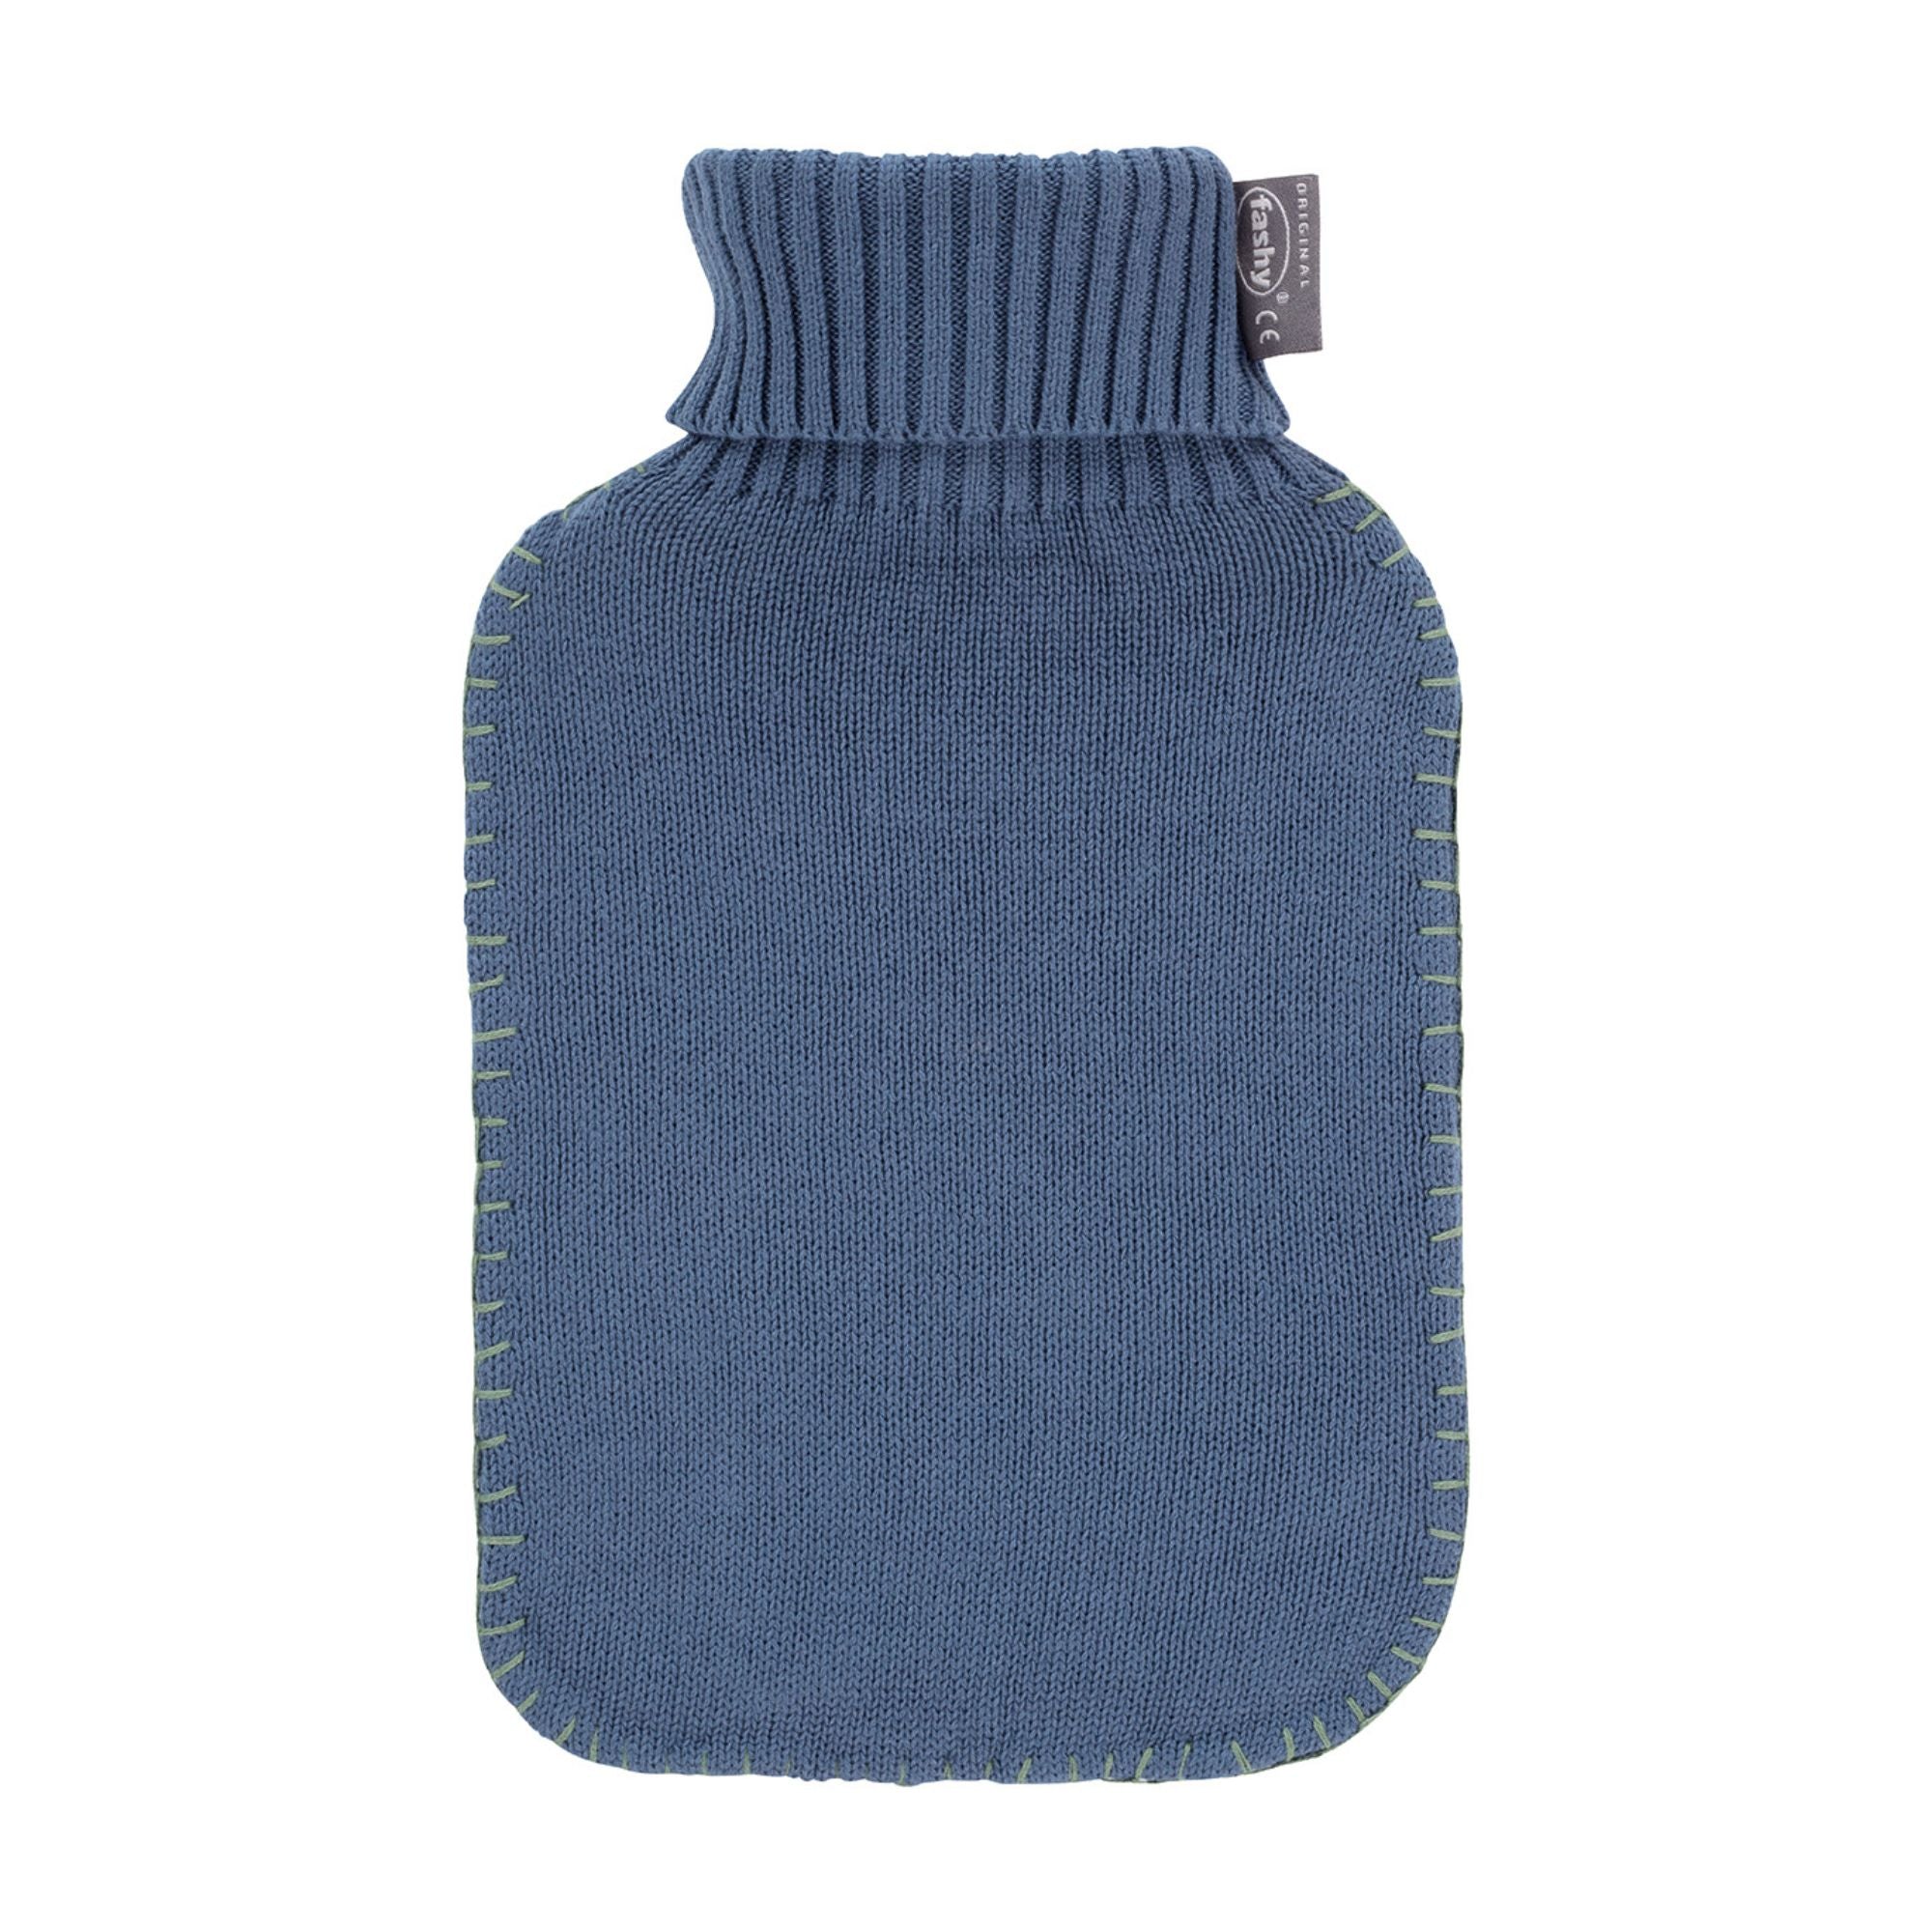 2 Litre Fashy Hot Water Bottle with Grey Knitted Stitched Seam Cotton Cover